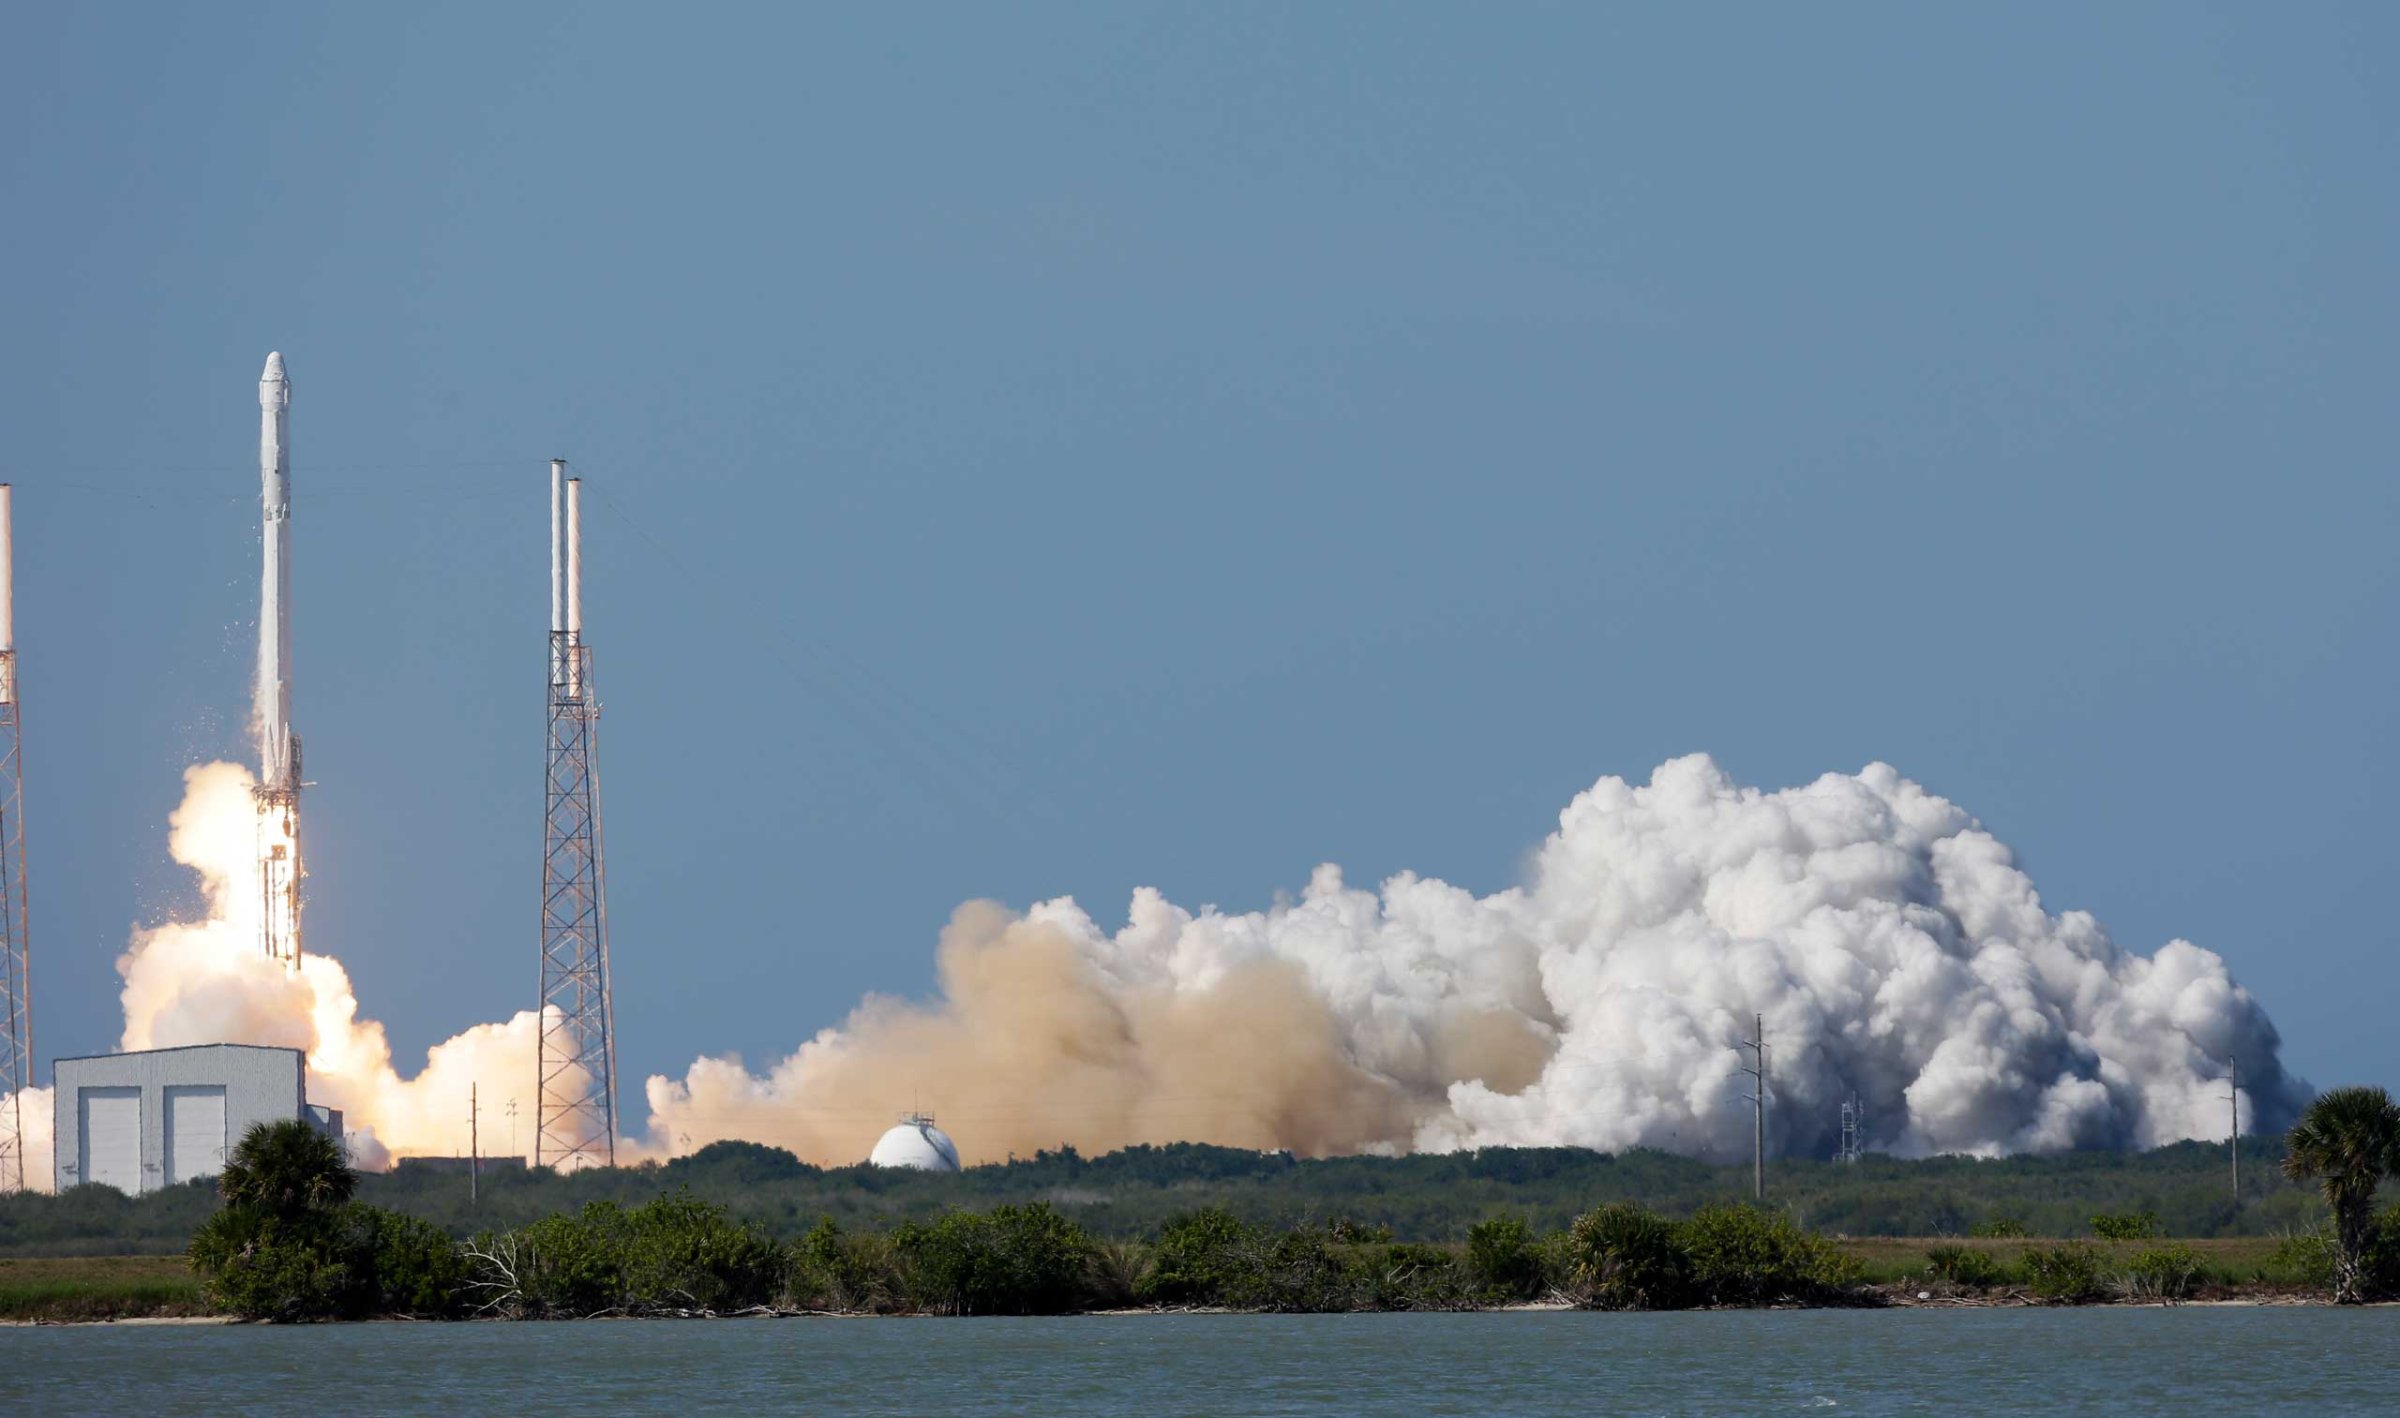 The Falcon 9 SpaceX rocket lifts off from launch at the Cape Canaveral Air Force Station in Cape Canaveral, Fla., on Apr. 14, 2015.